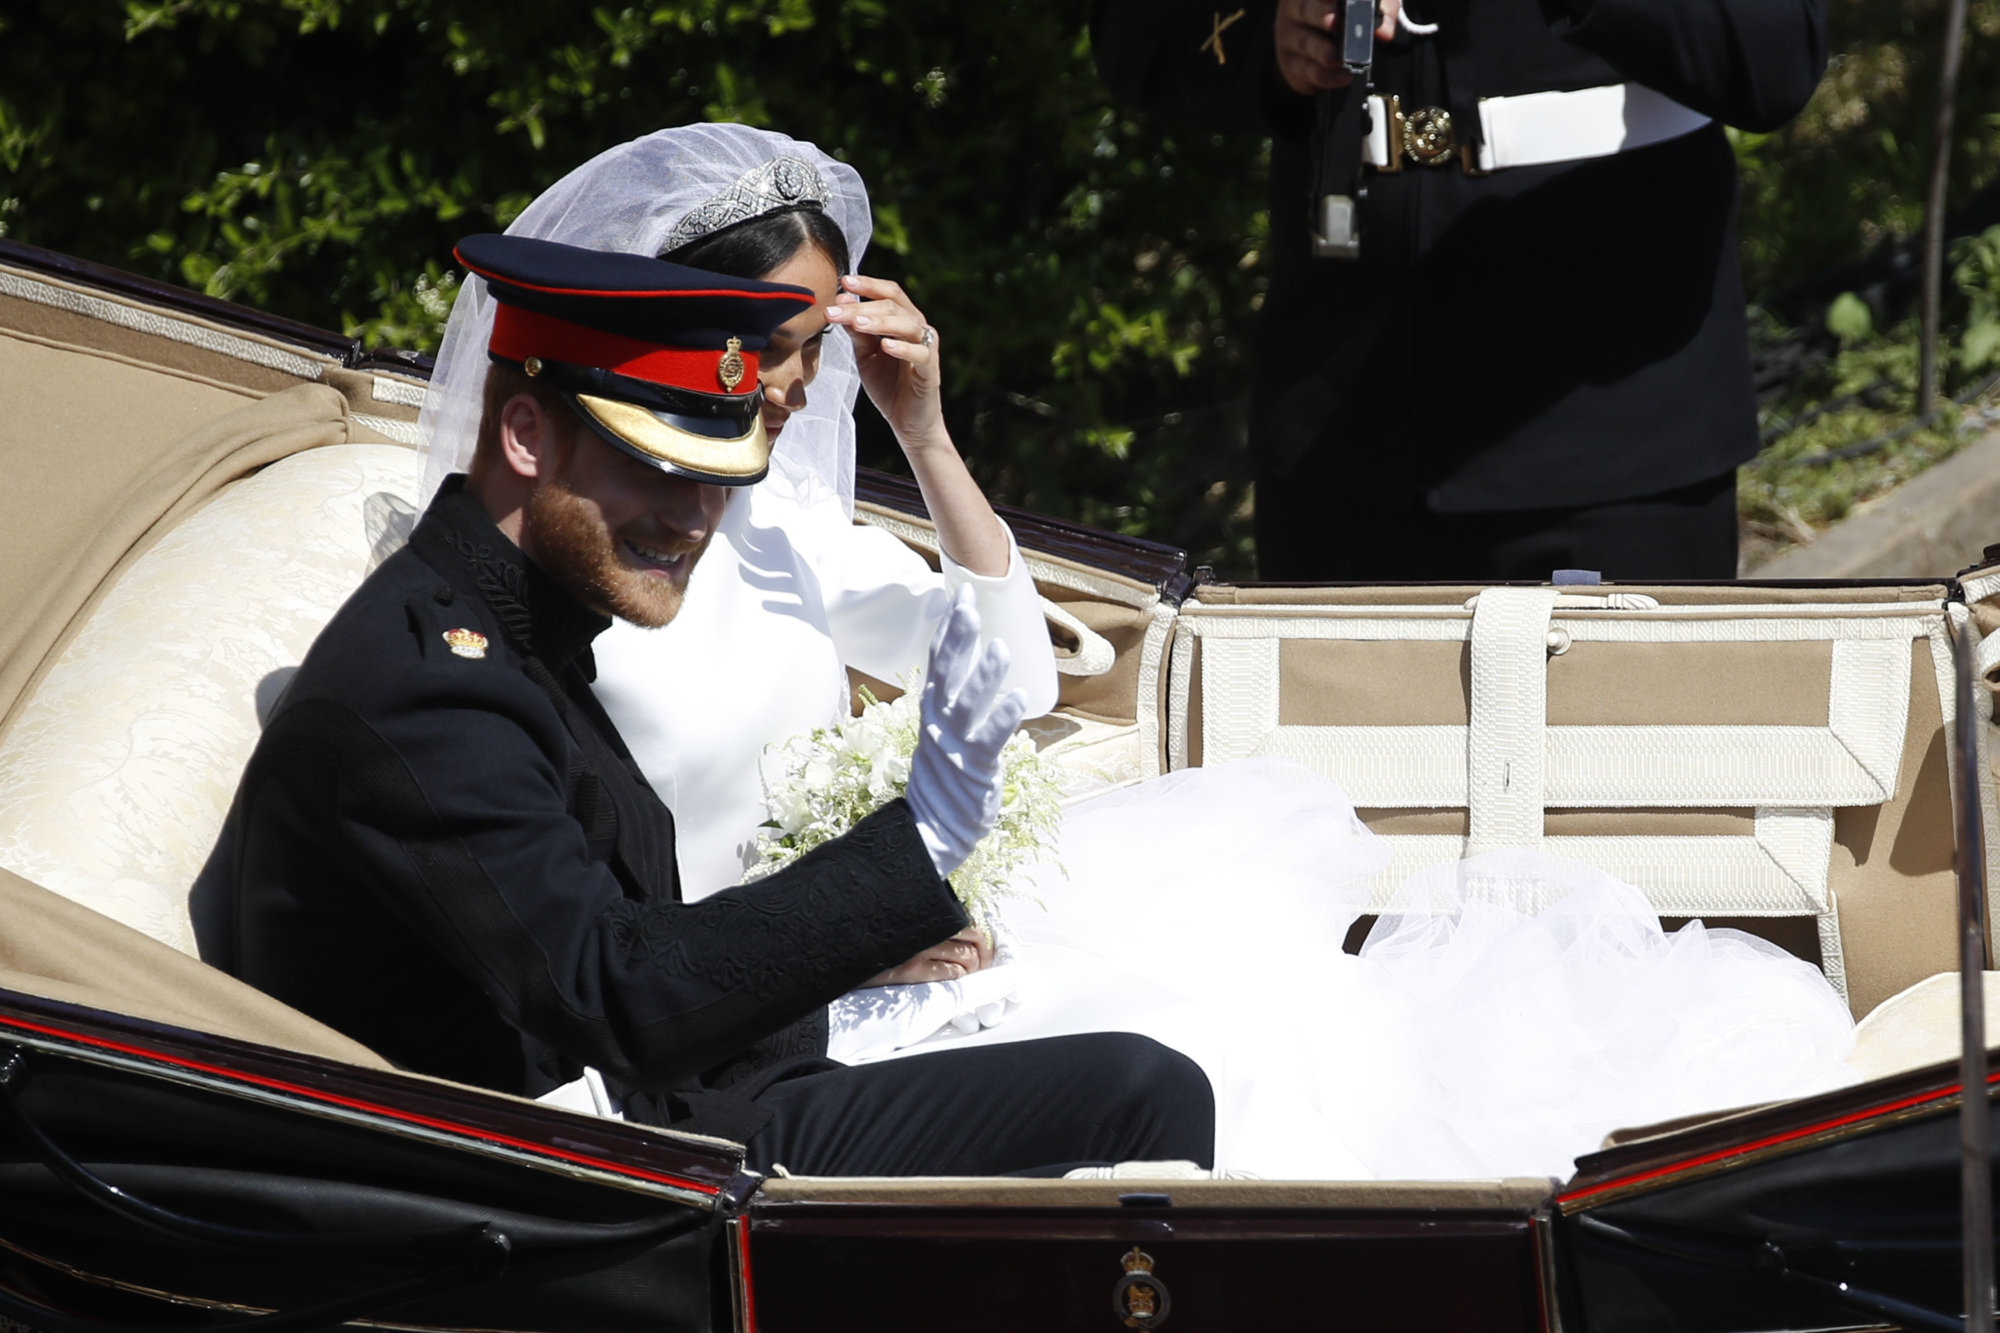 Britain's Prince Harry and Meghan Markle leave in a carriage after their wedding ceremony at St. George's Chapel in Windsor Castle in Windsor, near London, England, Saturday, May 19, 2018. (Odd Andersen/pool photo via AP)